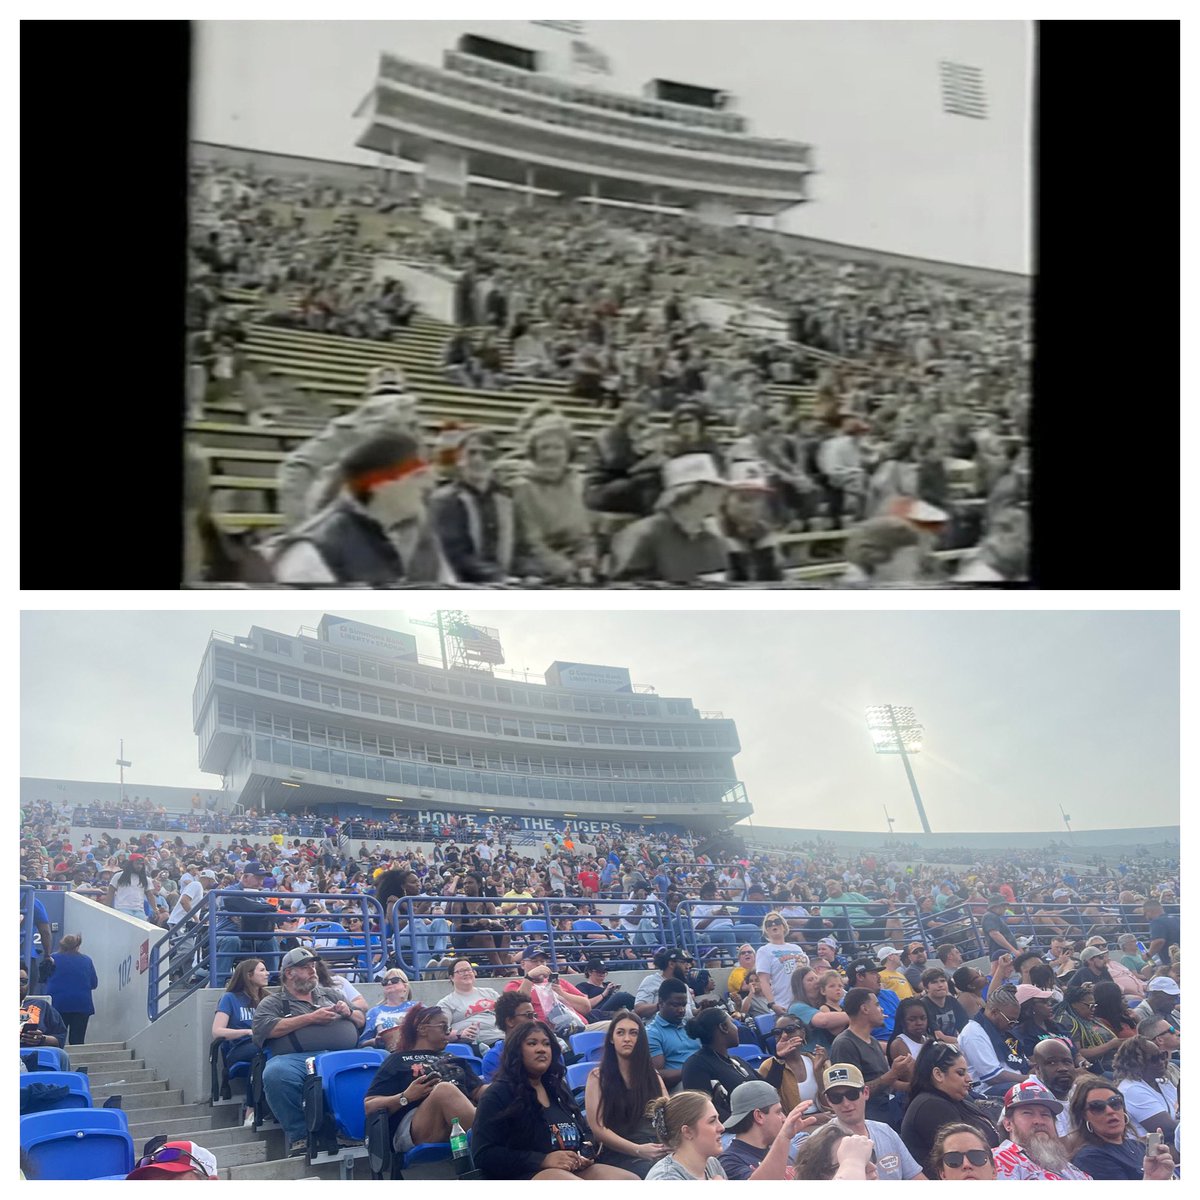 Top:
Liberty Bowl for @USFLShowboats home opener in 1984
Bottom:
Liberty Bowl for #Showboats home opener 39 years later at approximately the same spot 
#GoBoats @USFL_ShowBoats